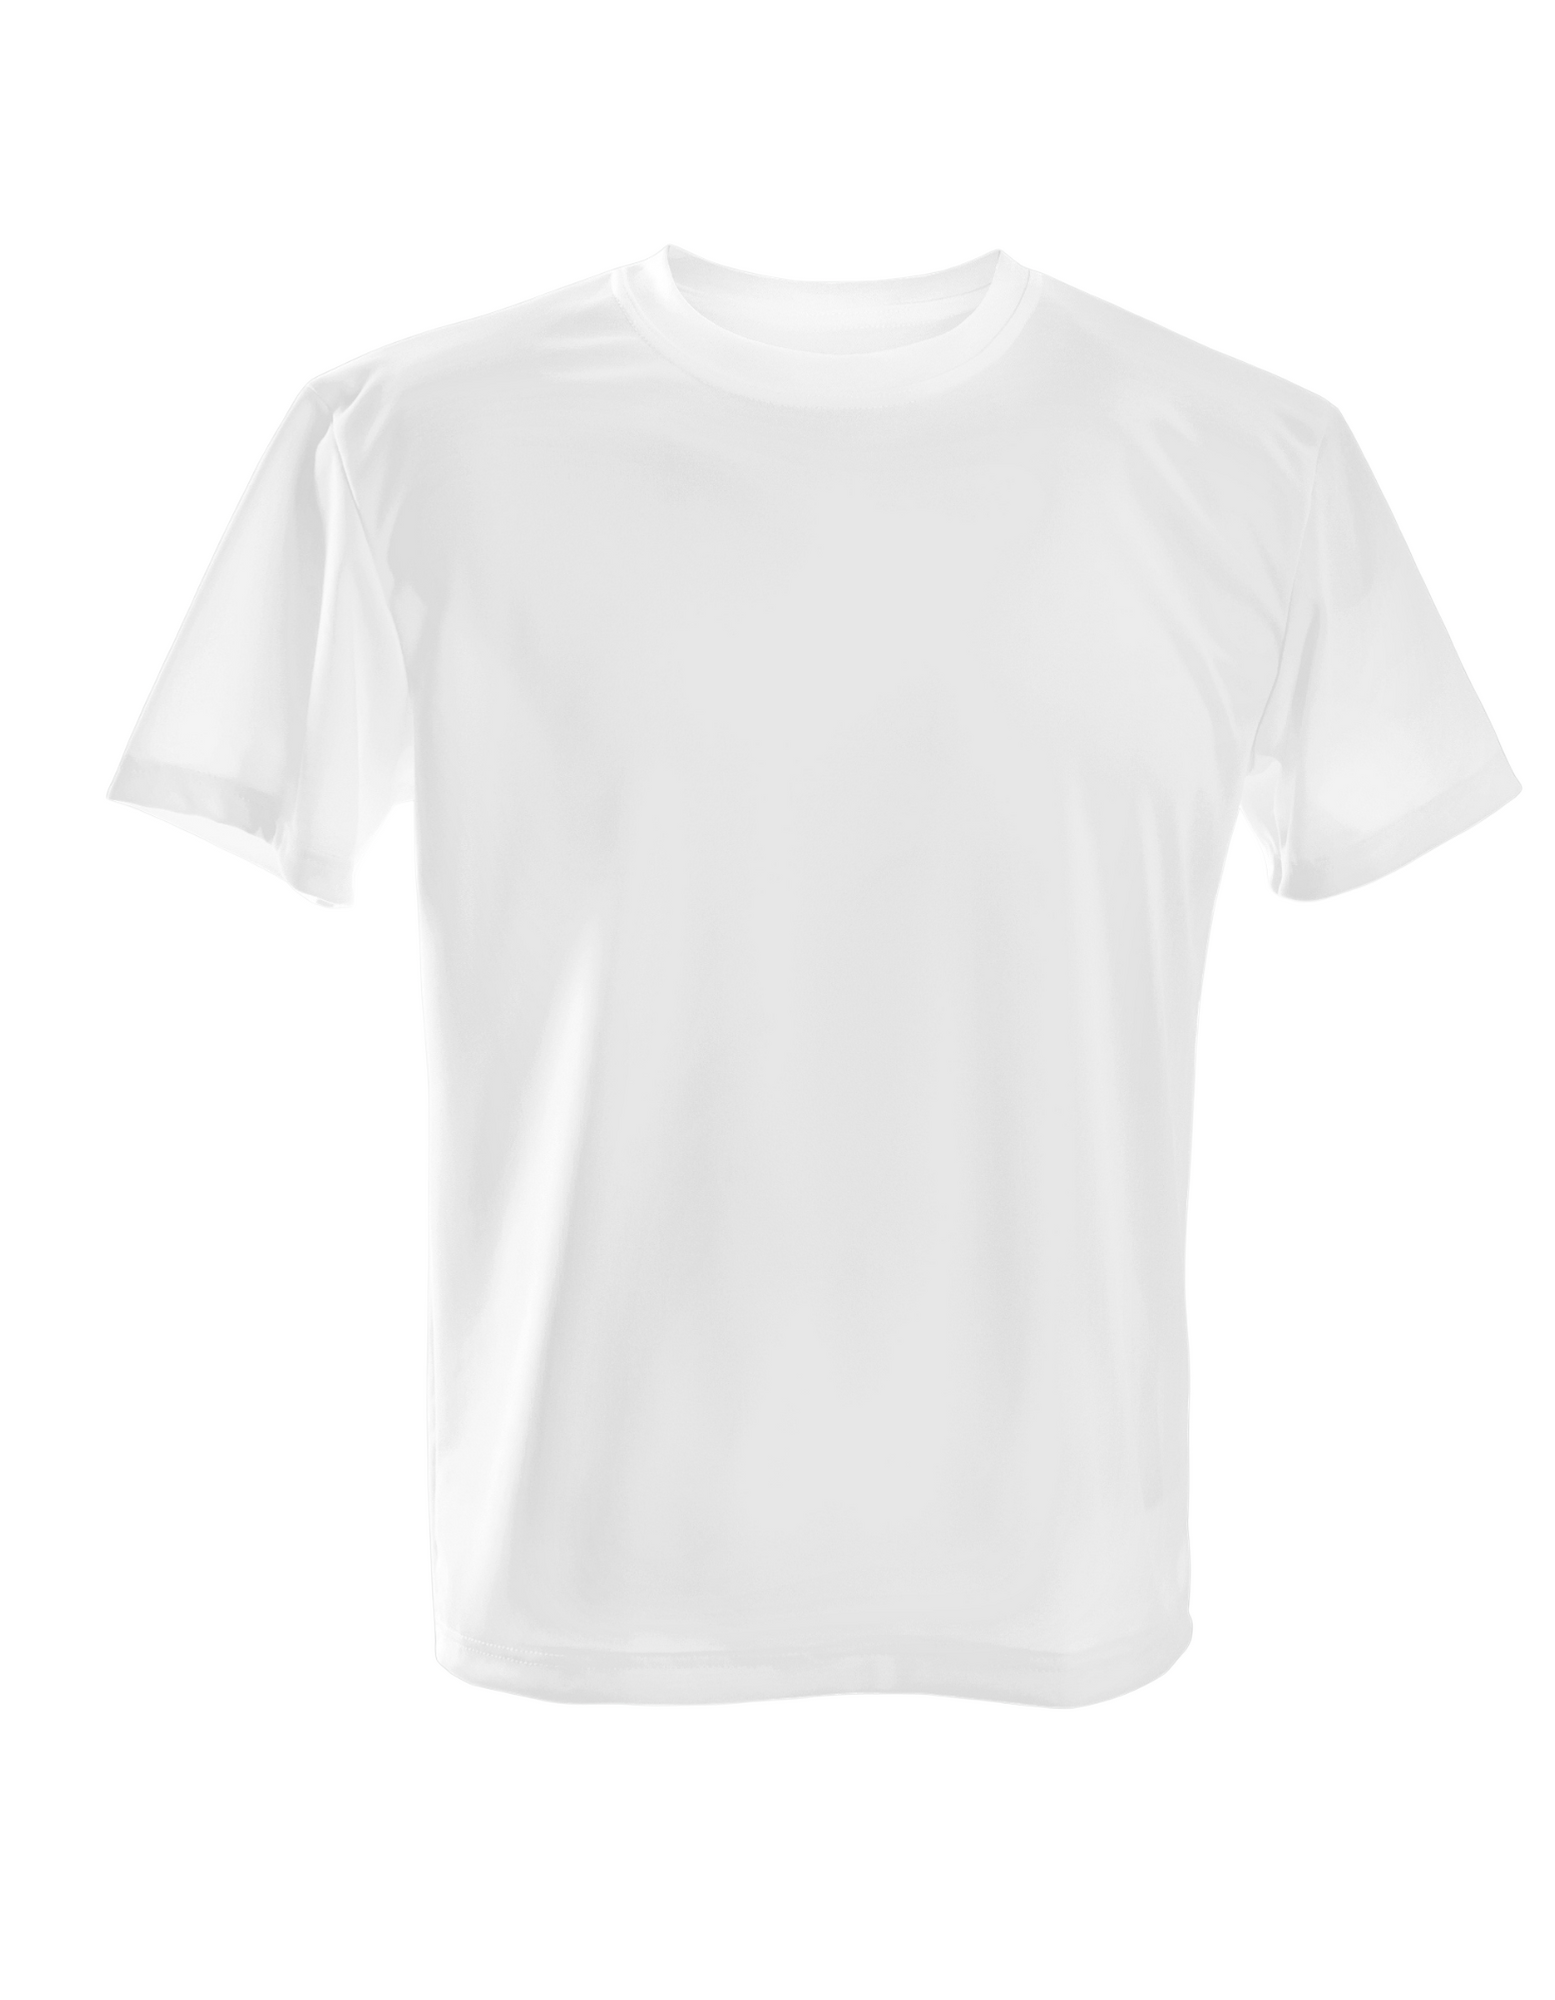 100 Polyester Adult White Tshirt Country Fresh Blanks